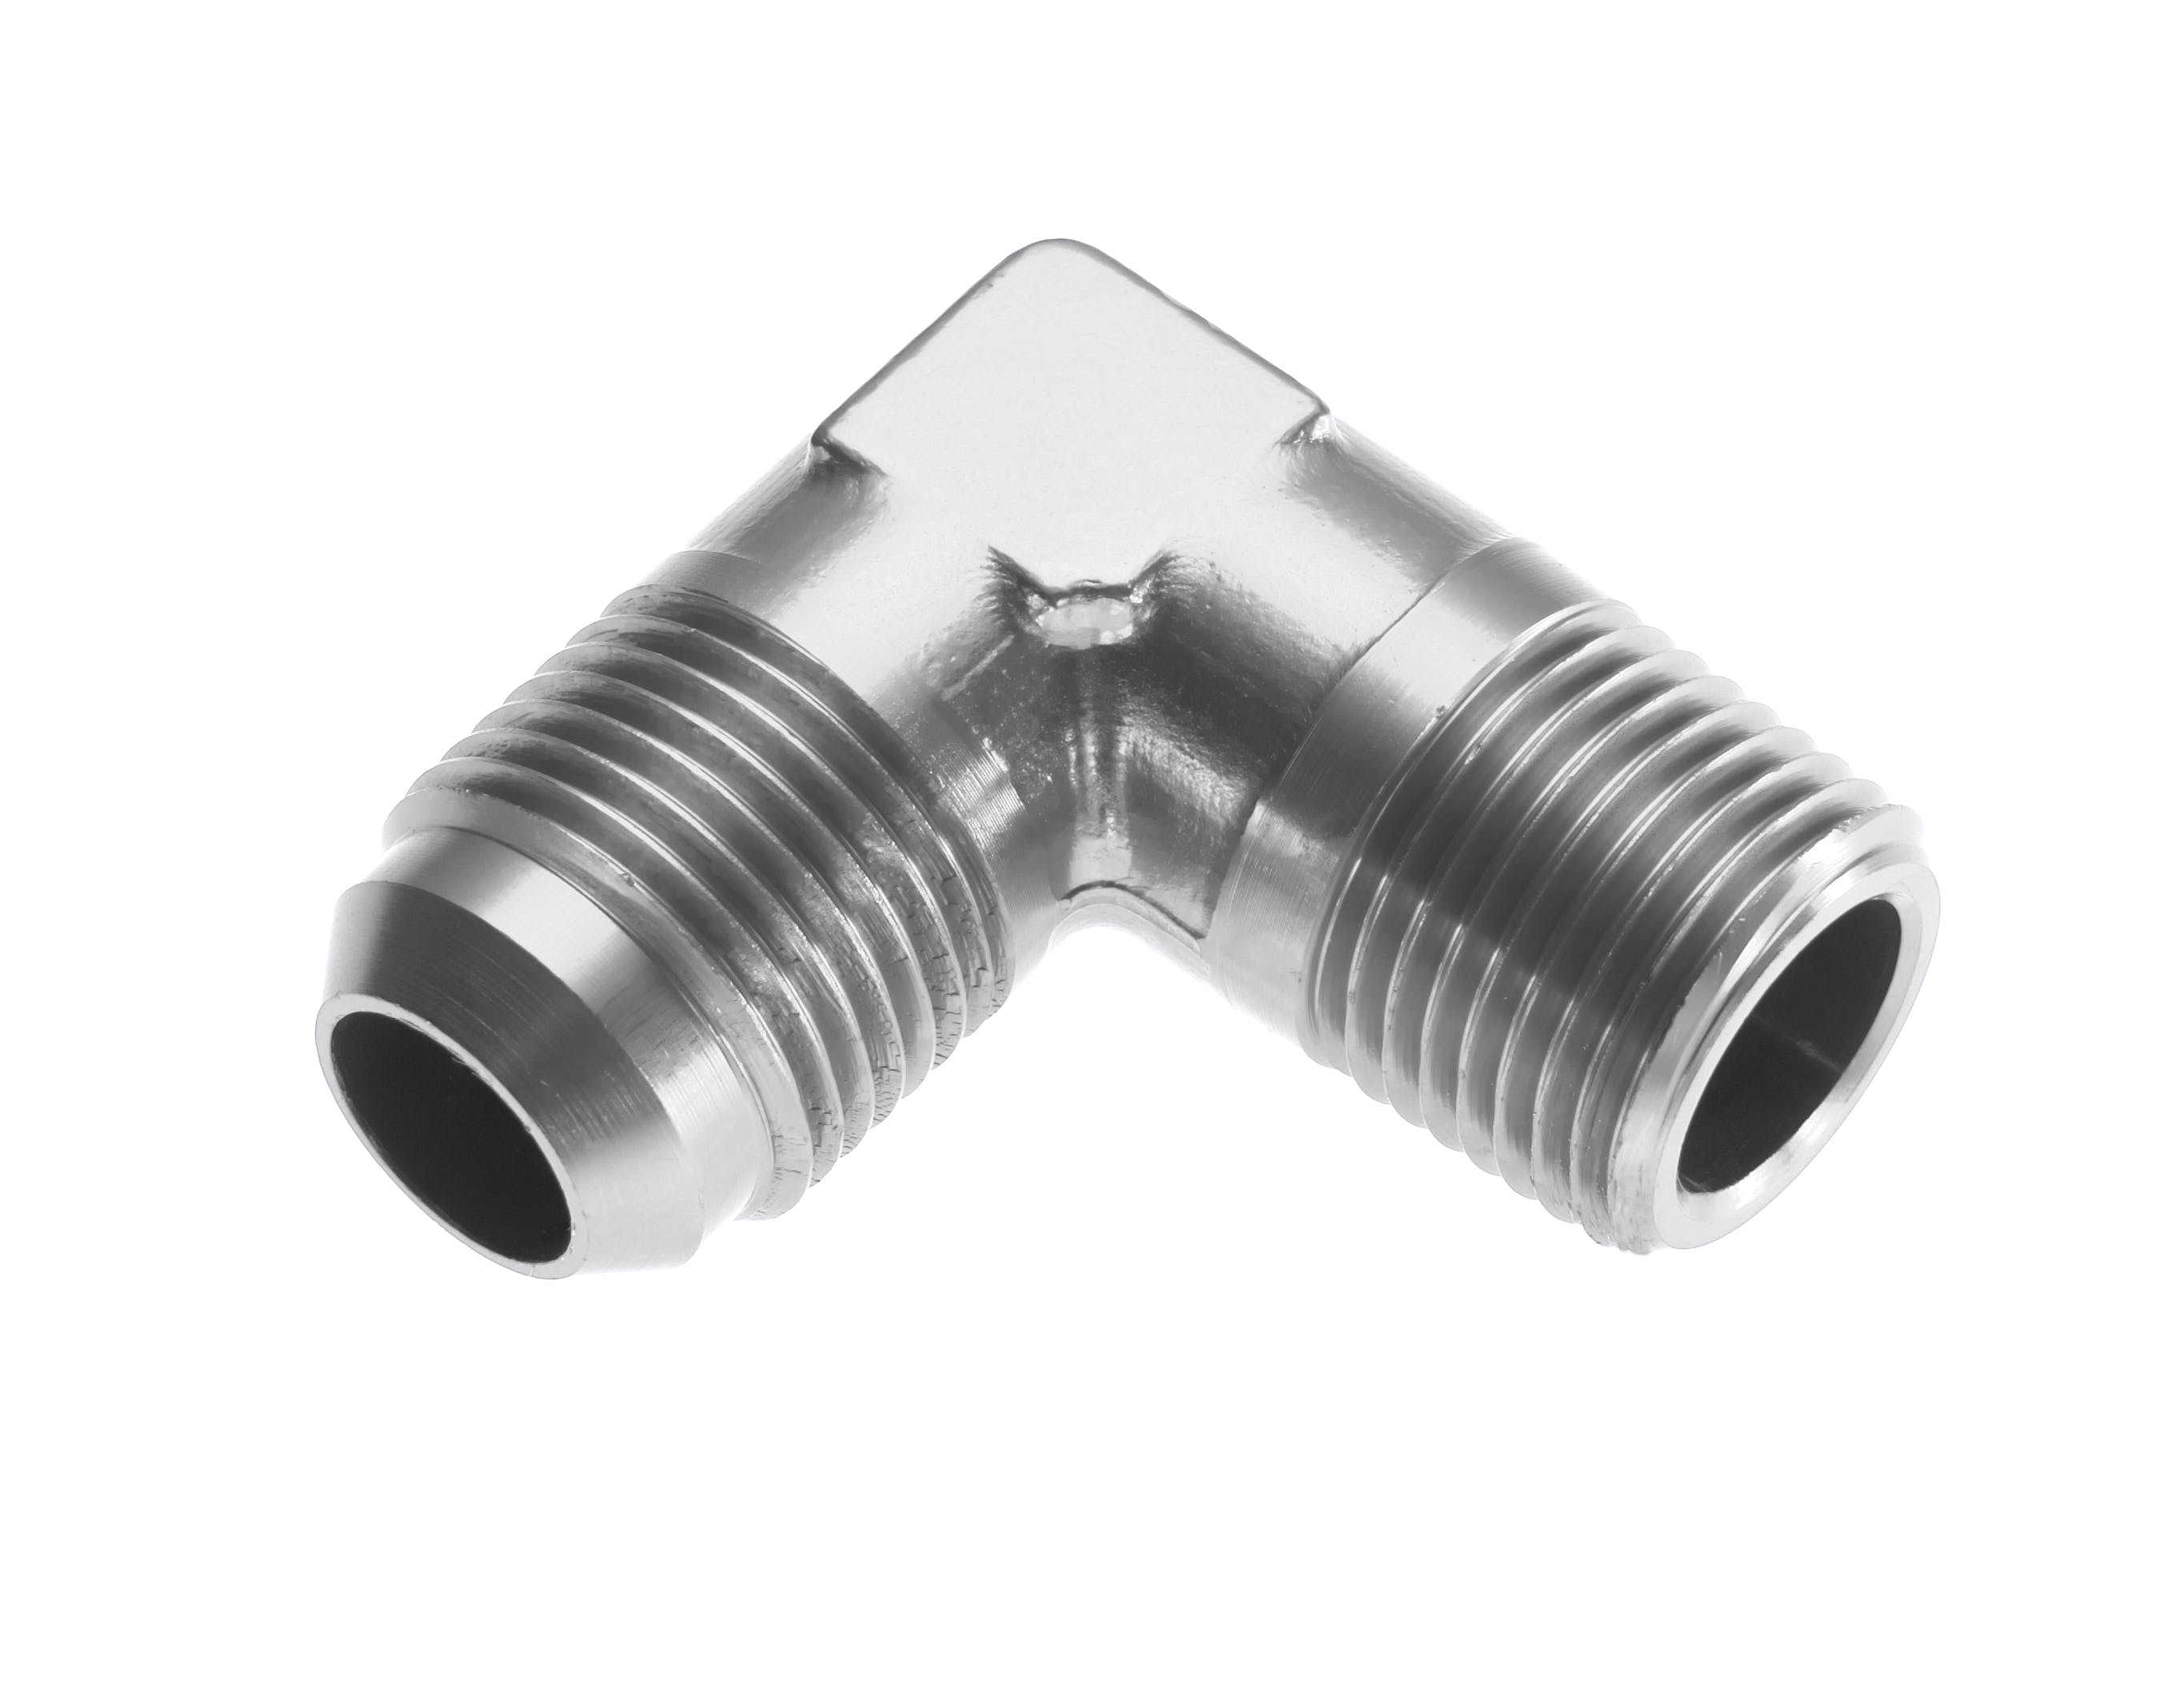 Redhorse Performance 822-12-08-5 -12 90 degree Male adapter to -08 (1/2in) NPT Male - clear